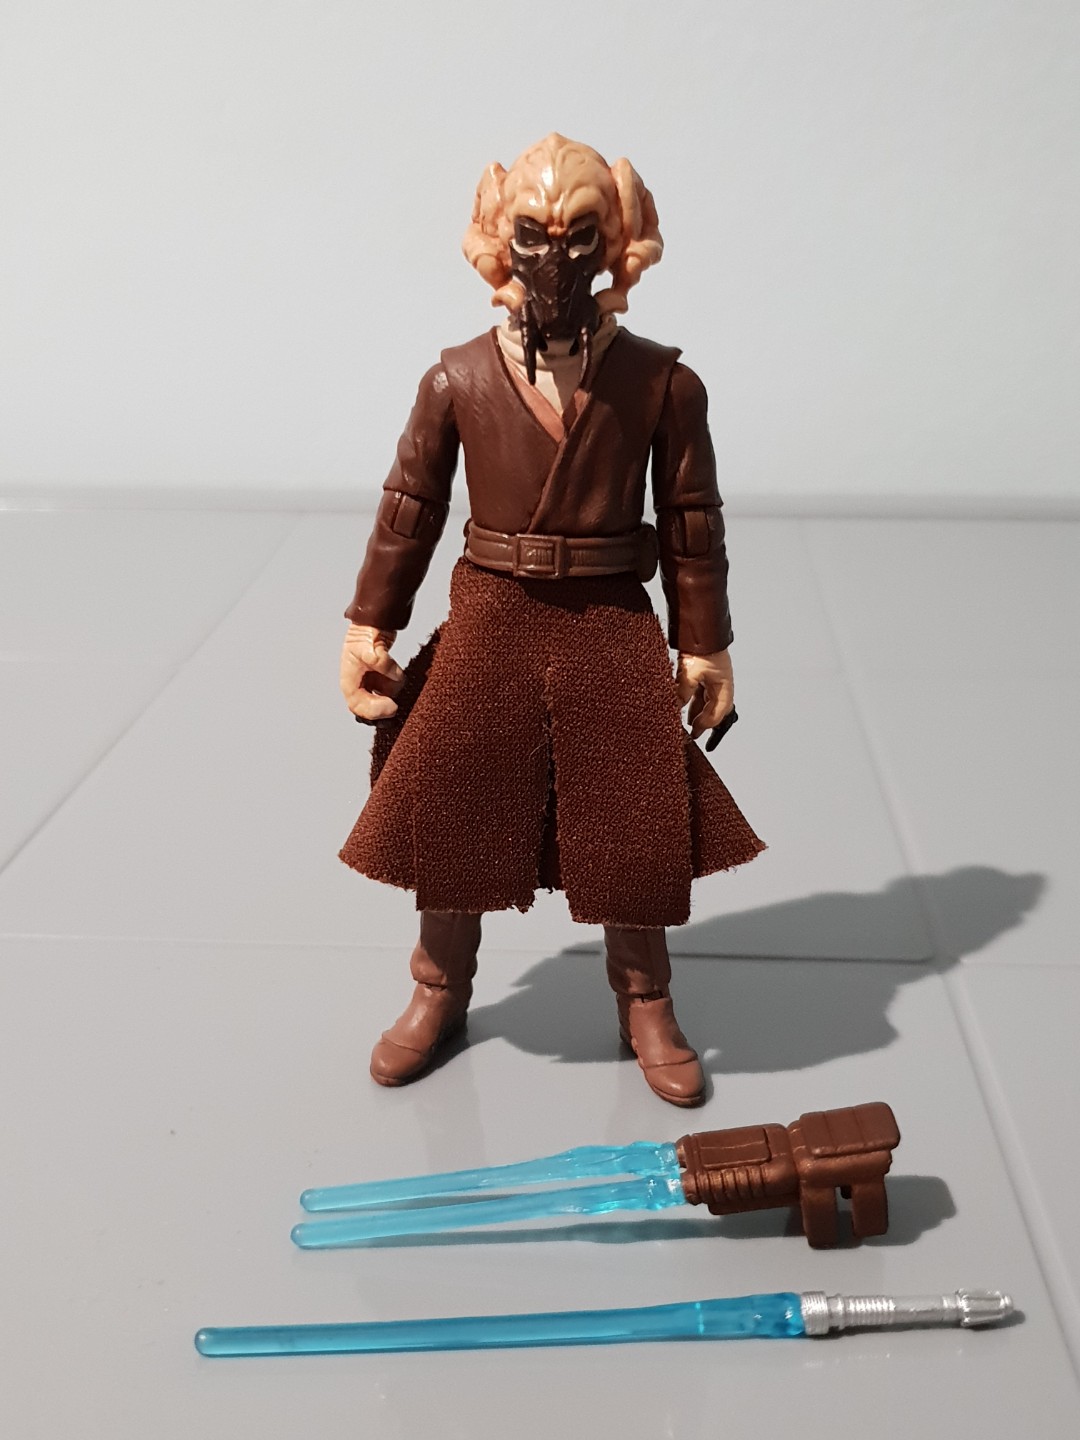 aayla secura vintage collection